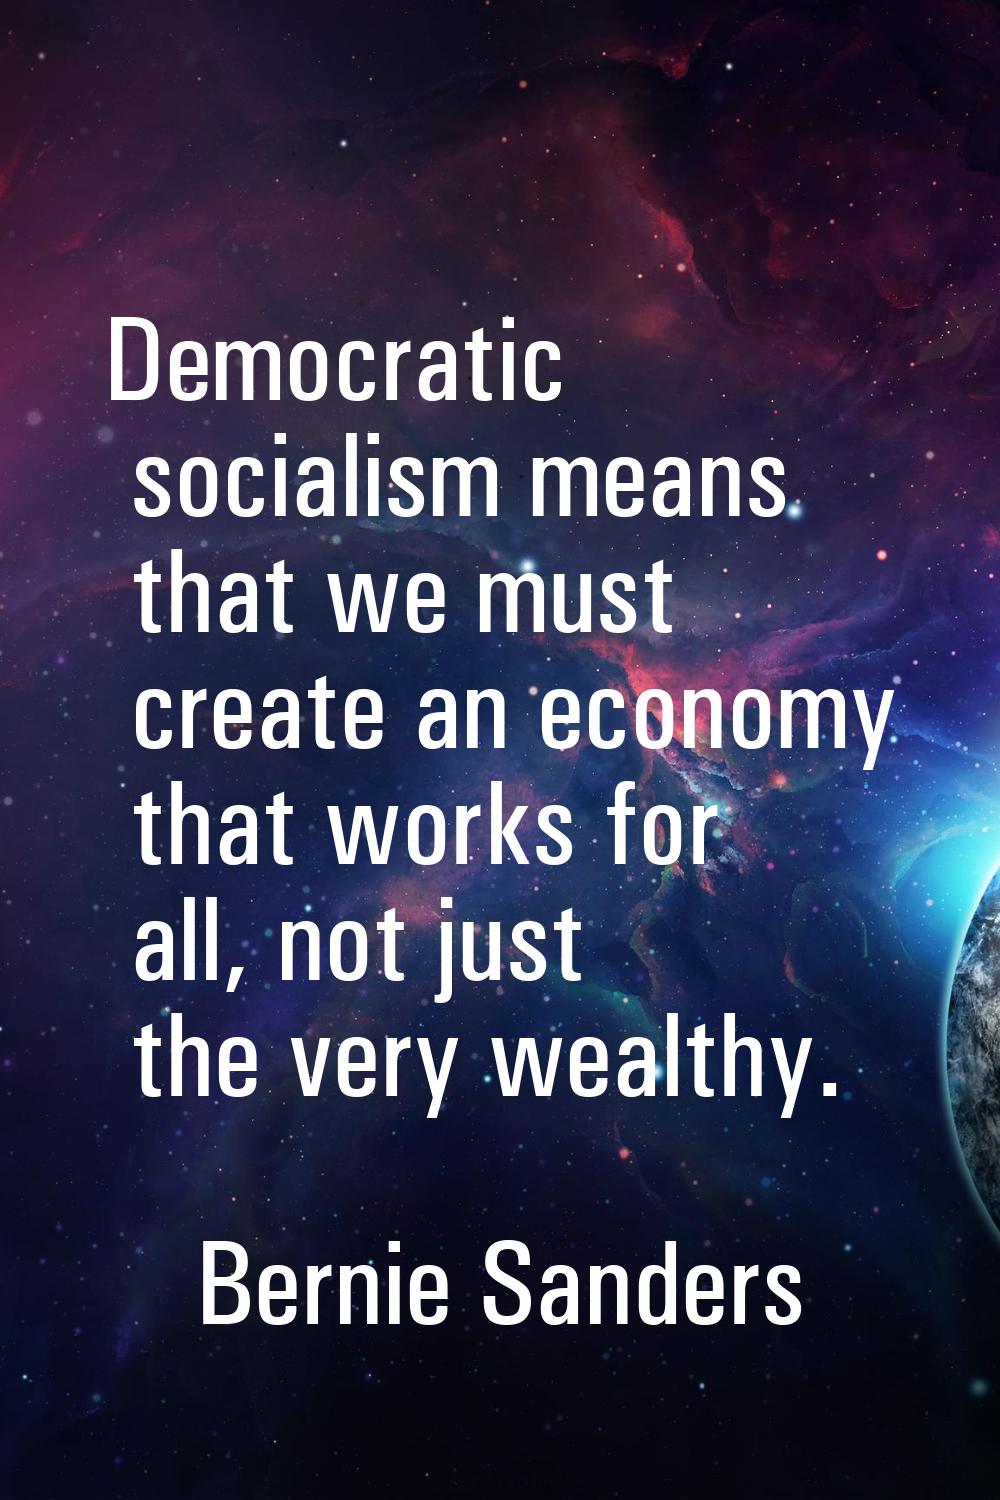 Democratic socialism means that we must create an economy that works for all, not just the very wea